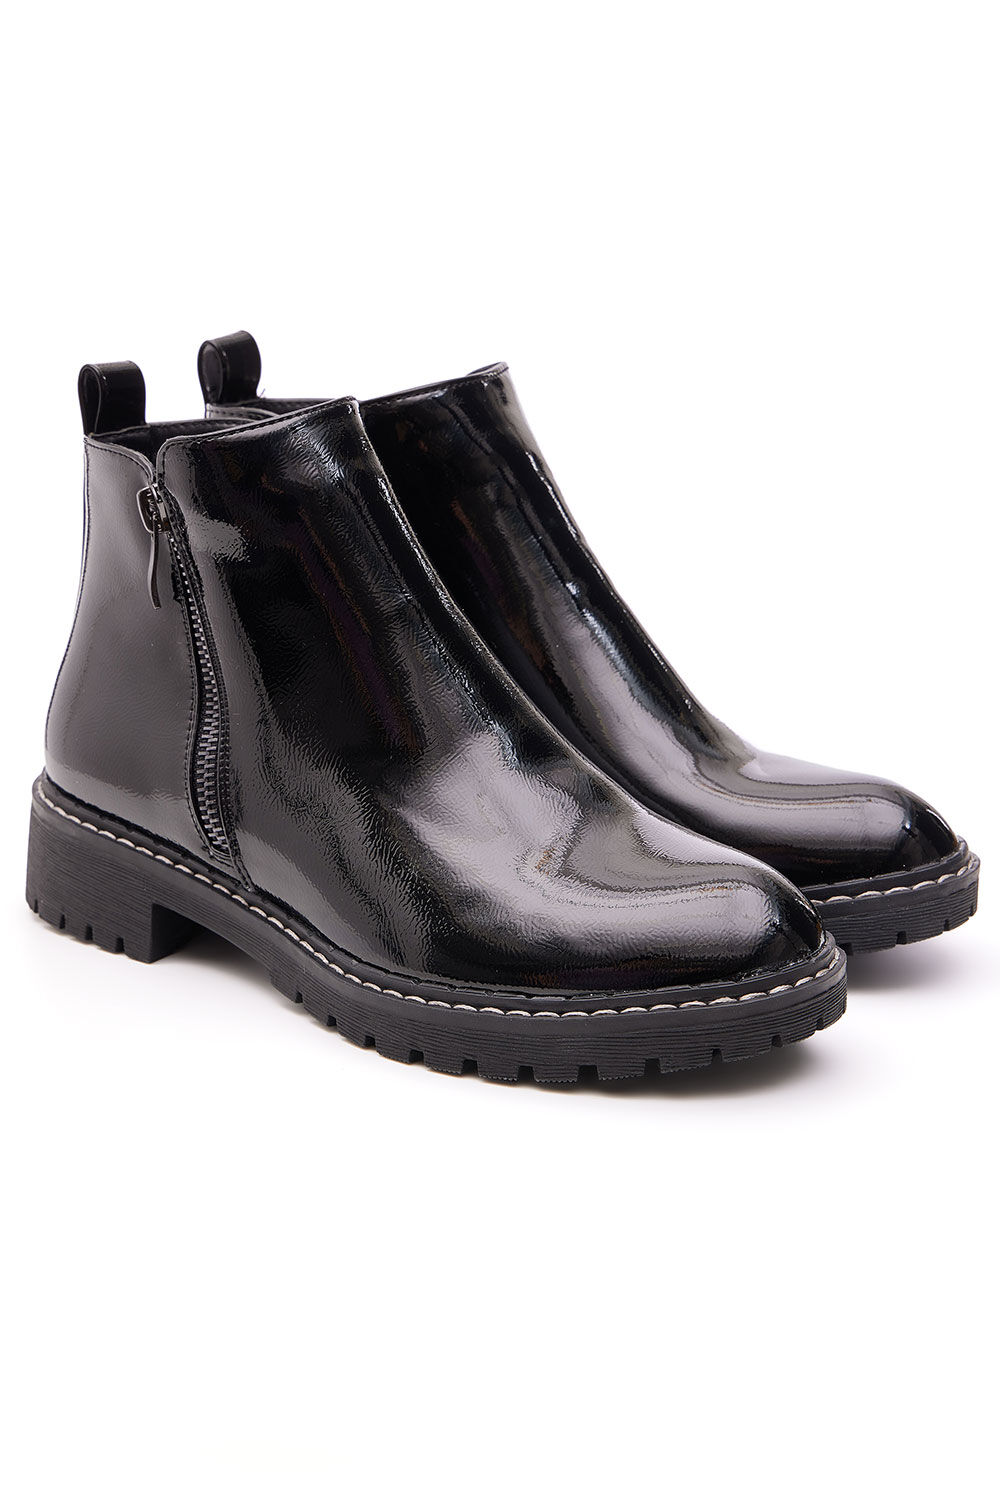 cushion walk black - patent chelsea boots with zip detail, size: 3